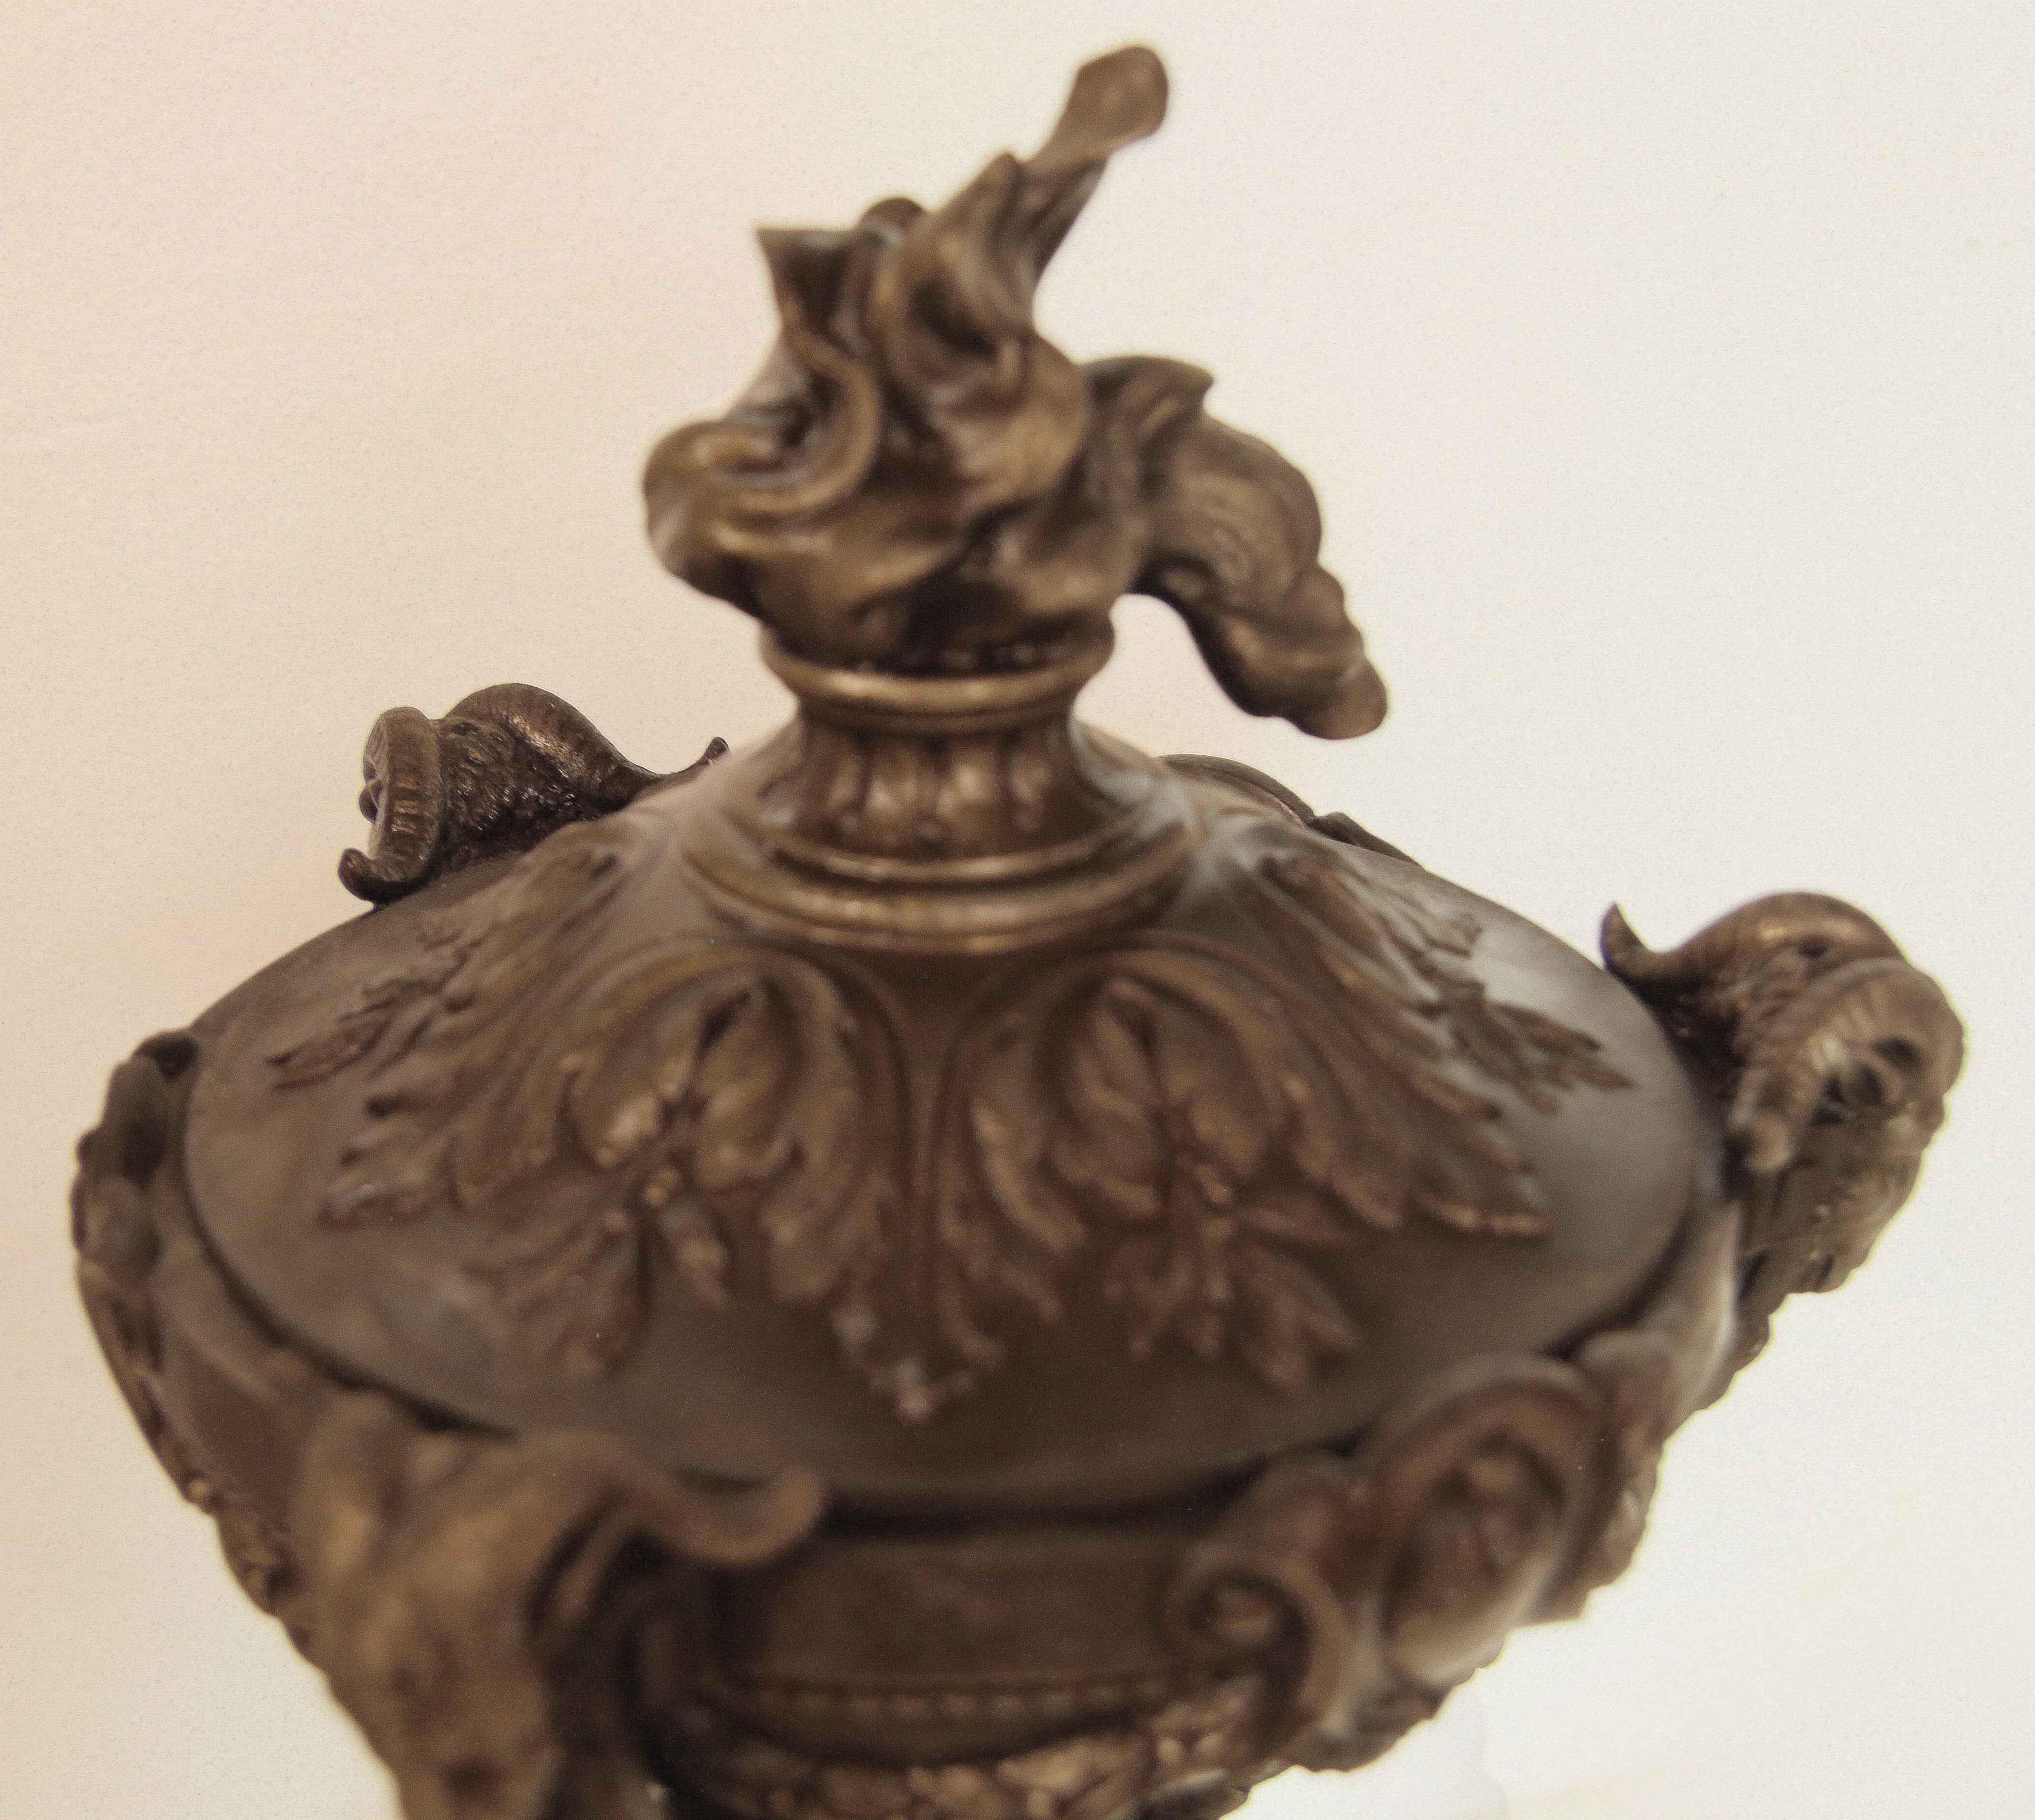 Pair of spelter urns,  the lid has a large flame finial with acanthus and foliate surrounding the perimeter below. Inside is a removable brass liner.  A round reeded base with central raised rosette supports three ''legs'' decorated with acanthus